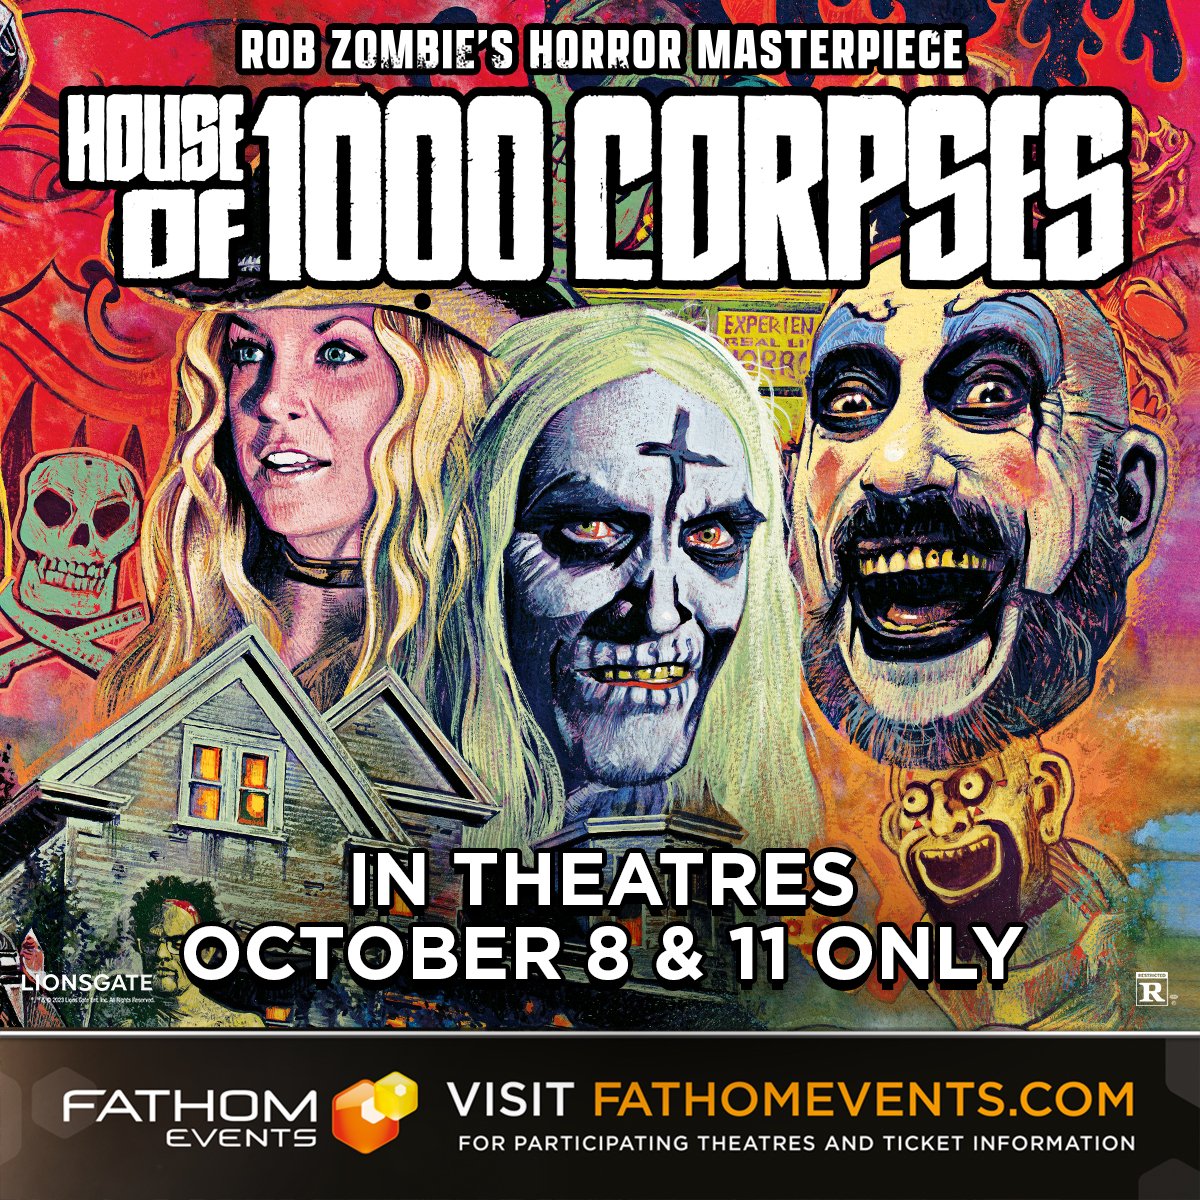 HOUSE OF 1000 CORPSES is heading back to theaters nationwide in October! Tickets go on sale August 11th. hubs.la/Q01ZSCtk0